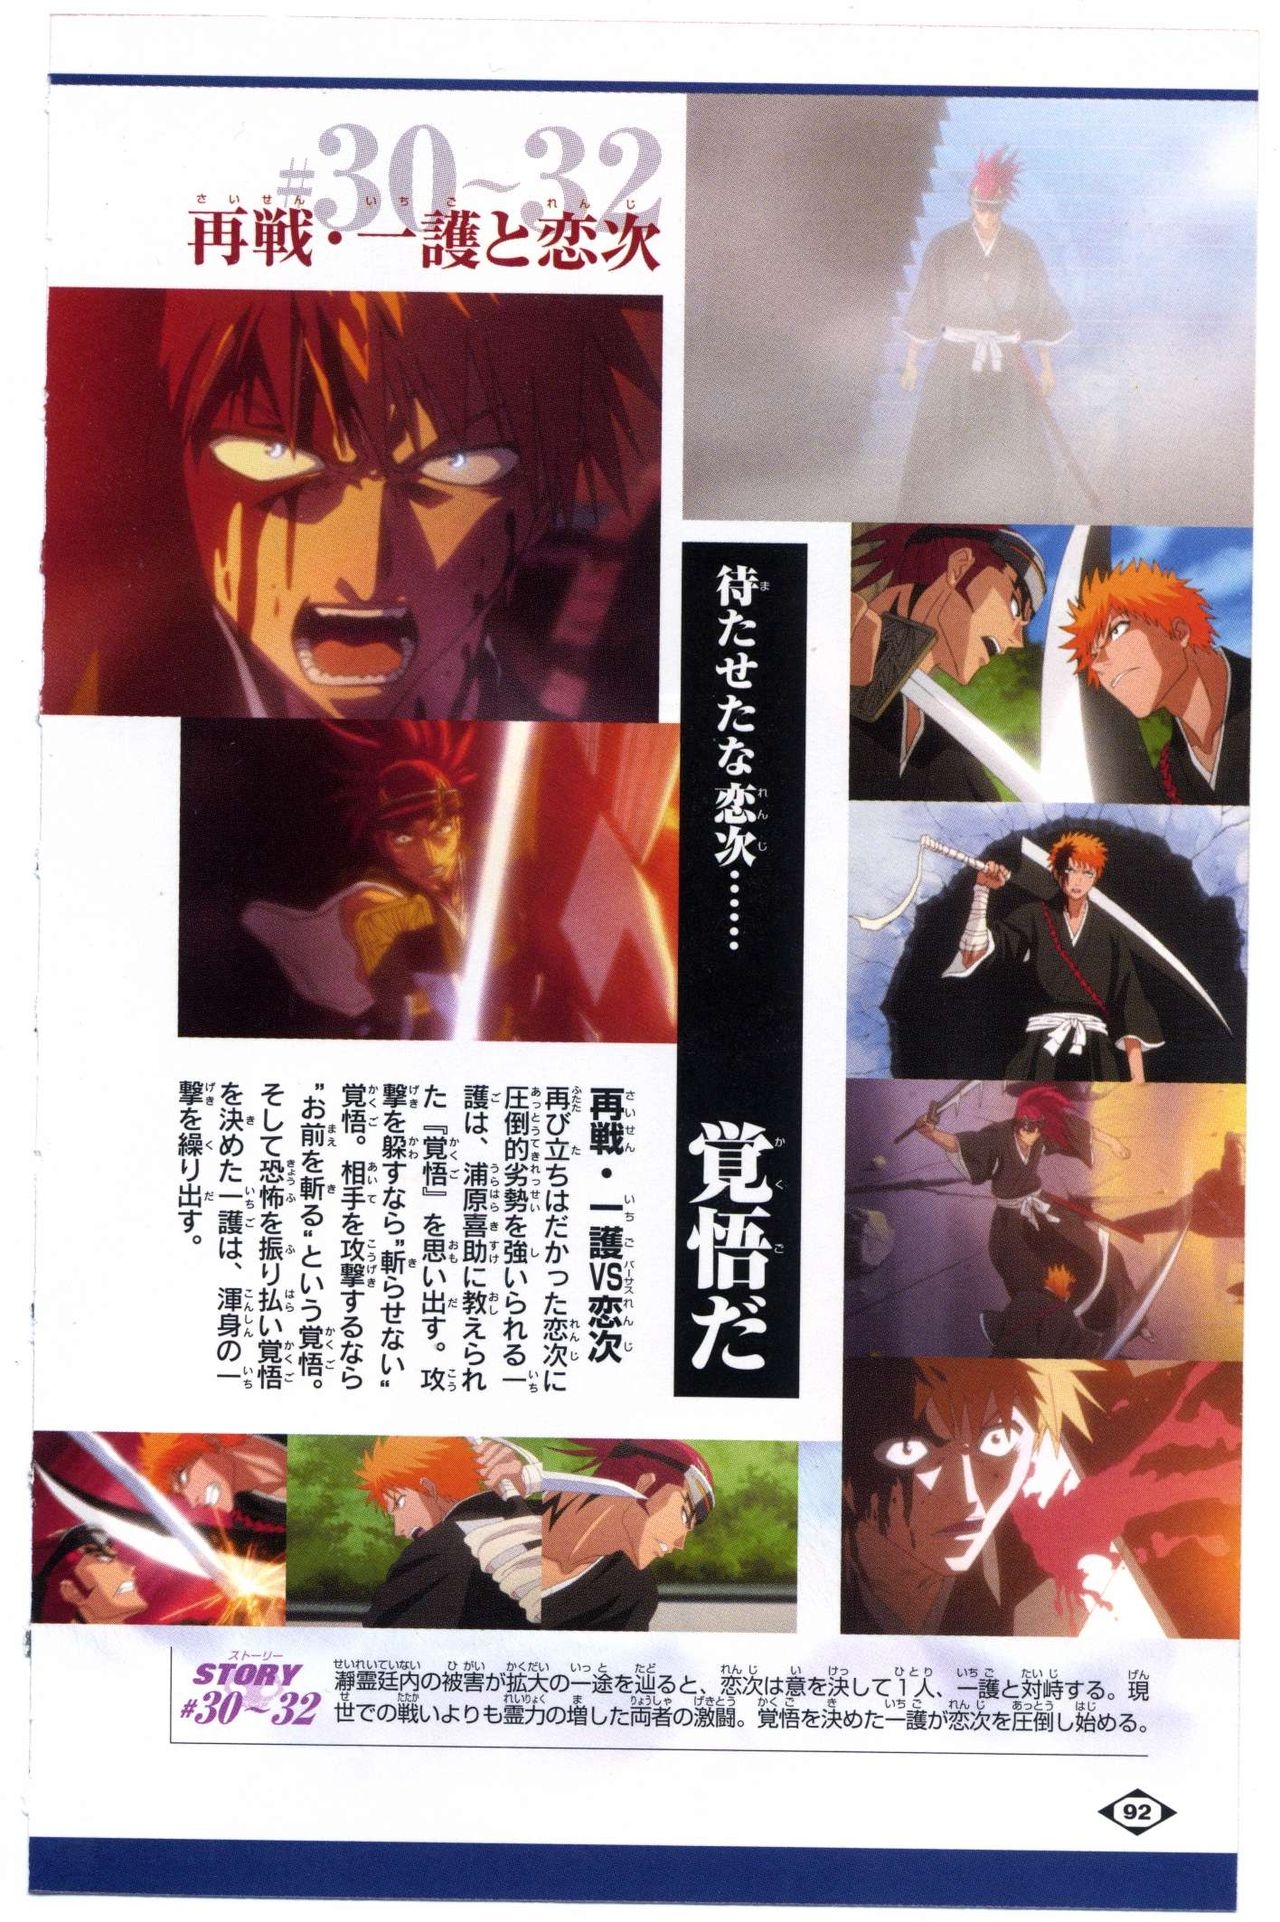 Bleach: Official Animation Book VIBEs 92